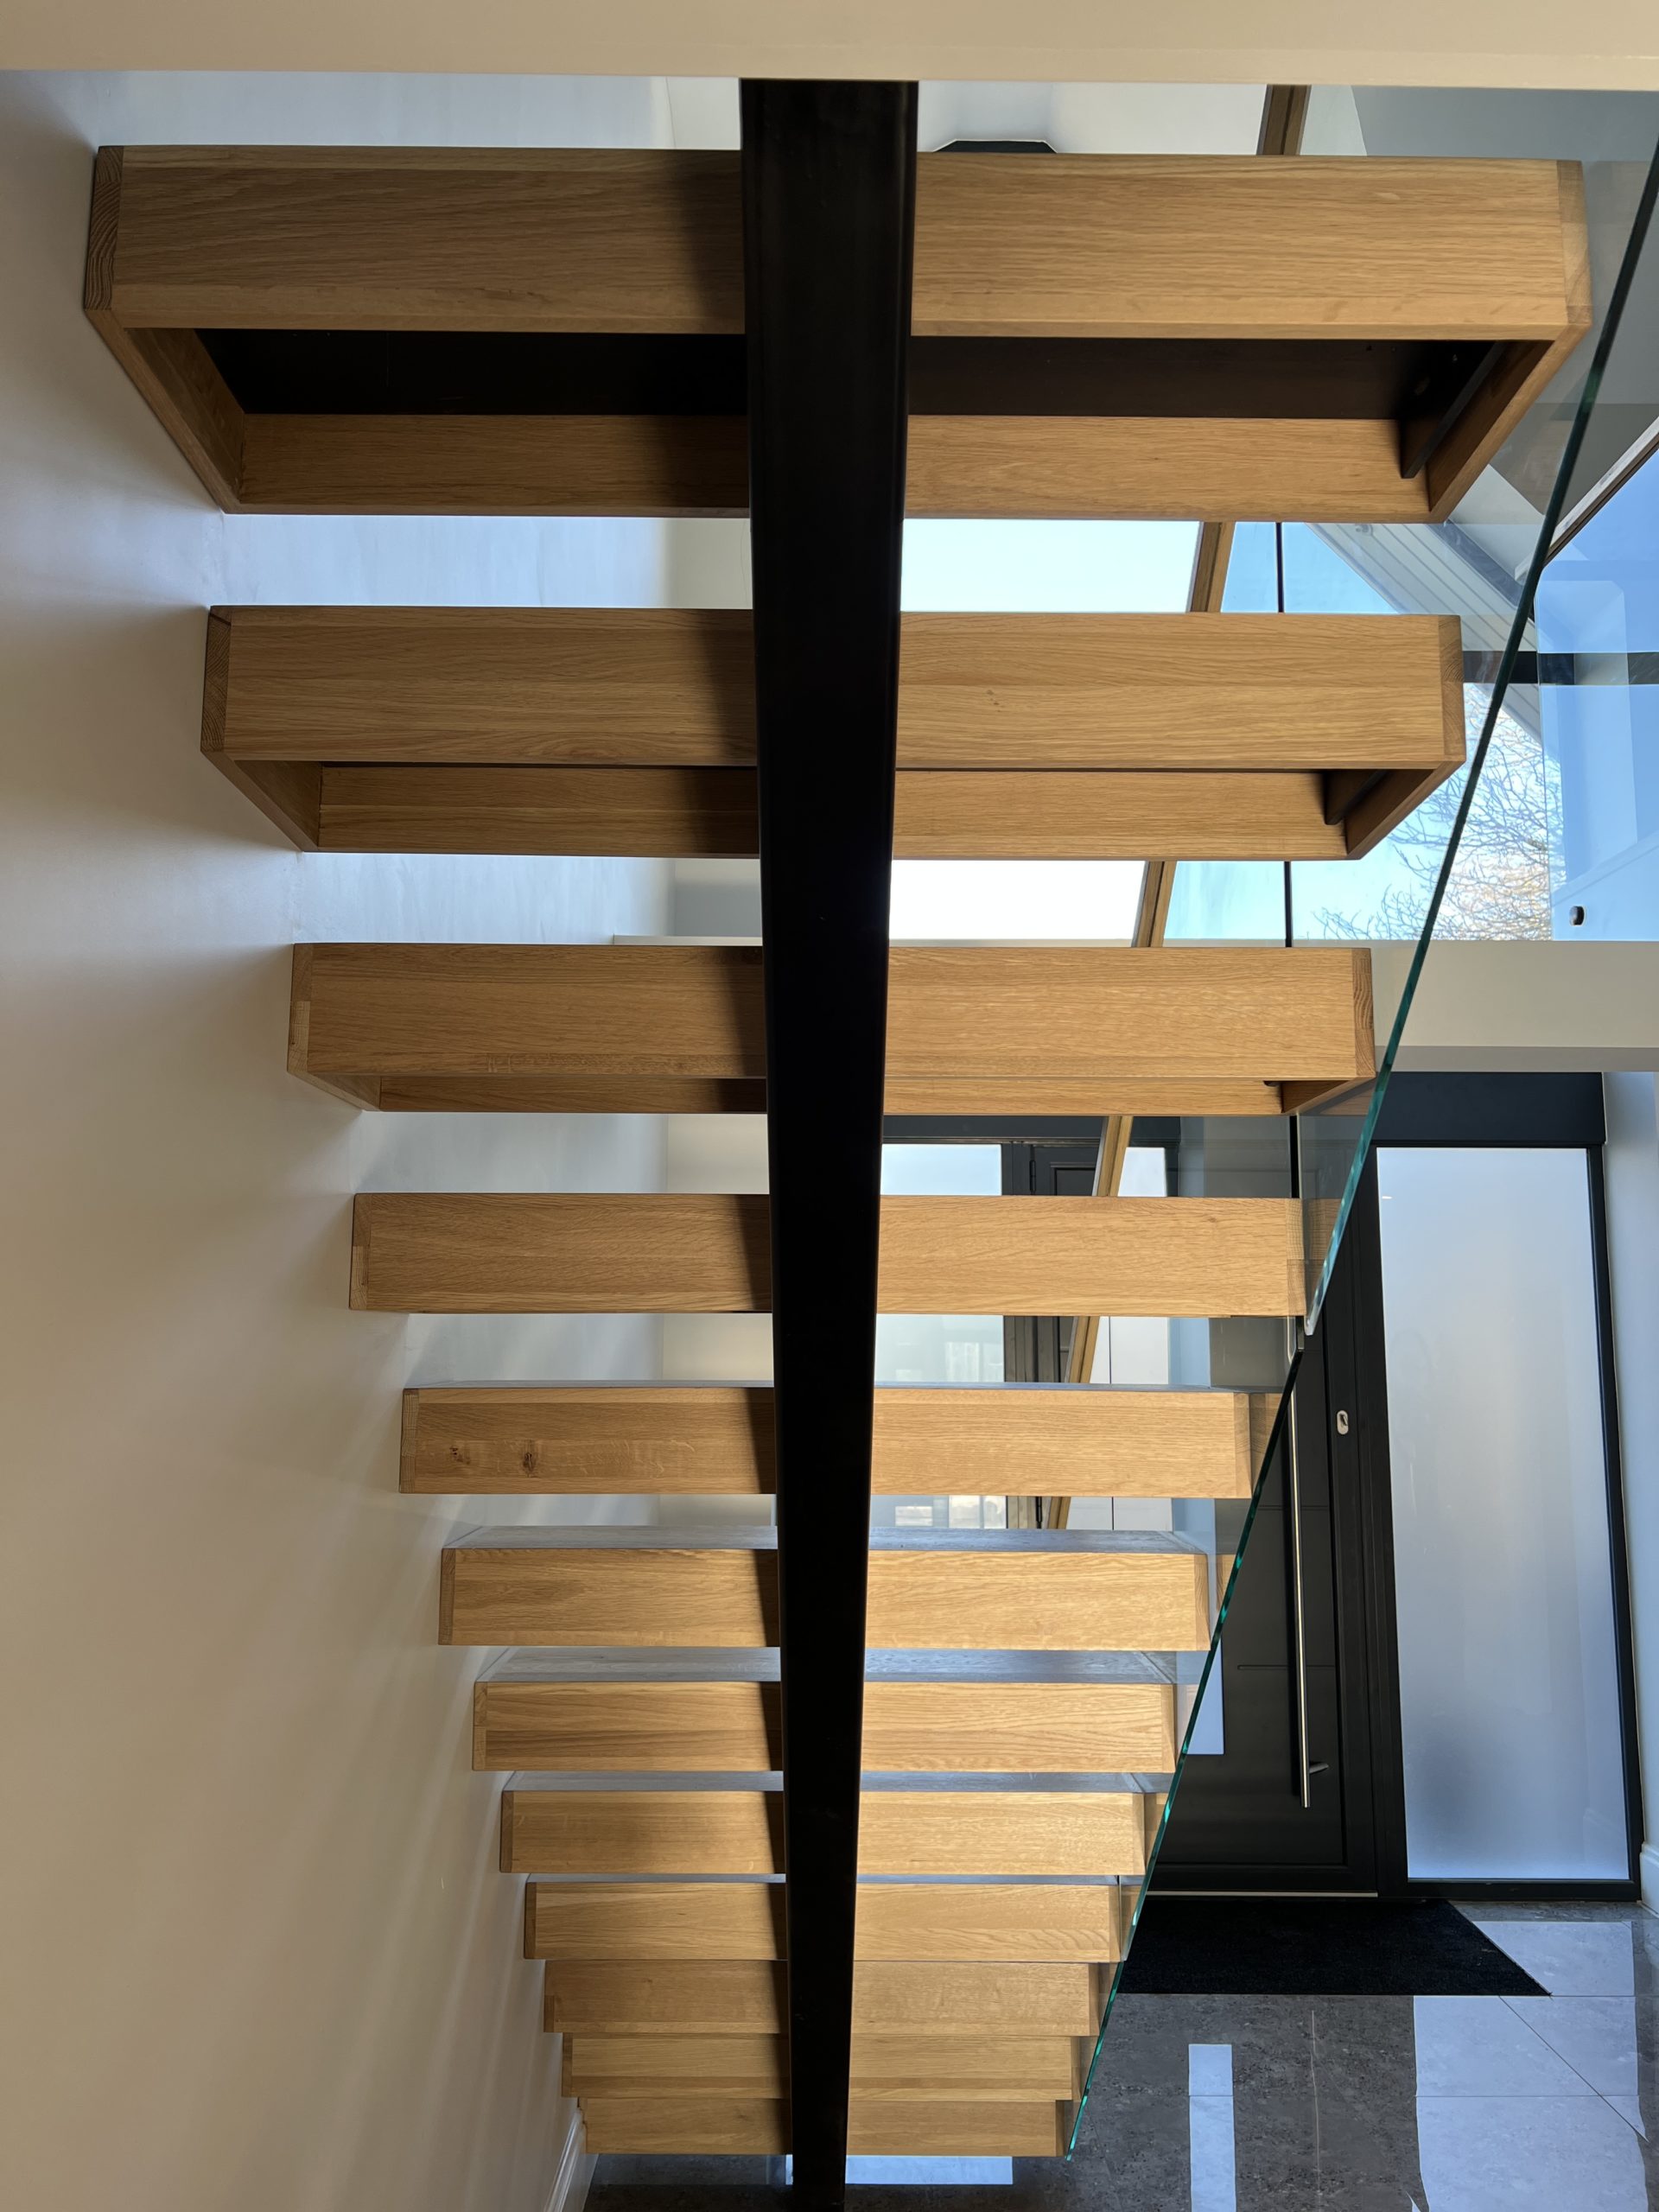 spine staircase with glass balustrade